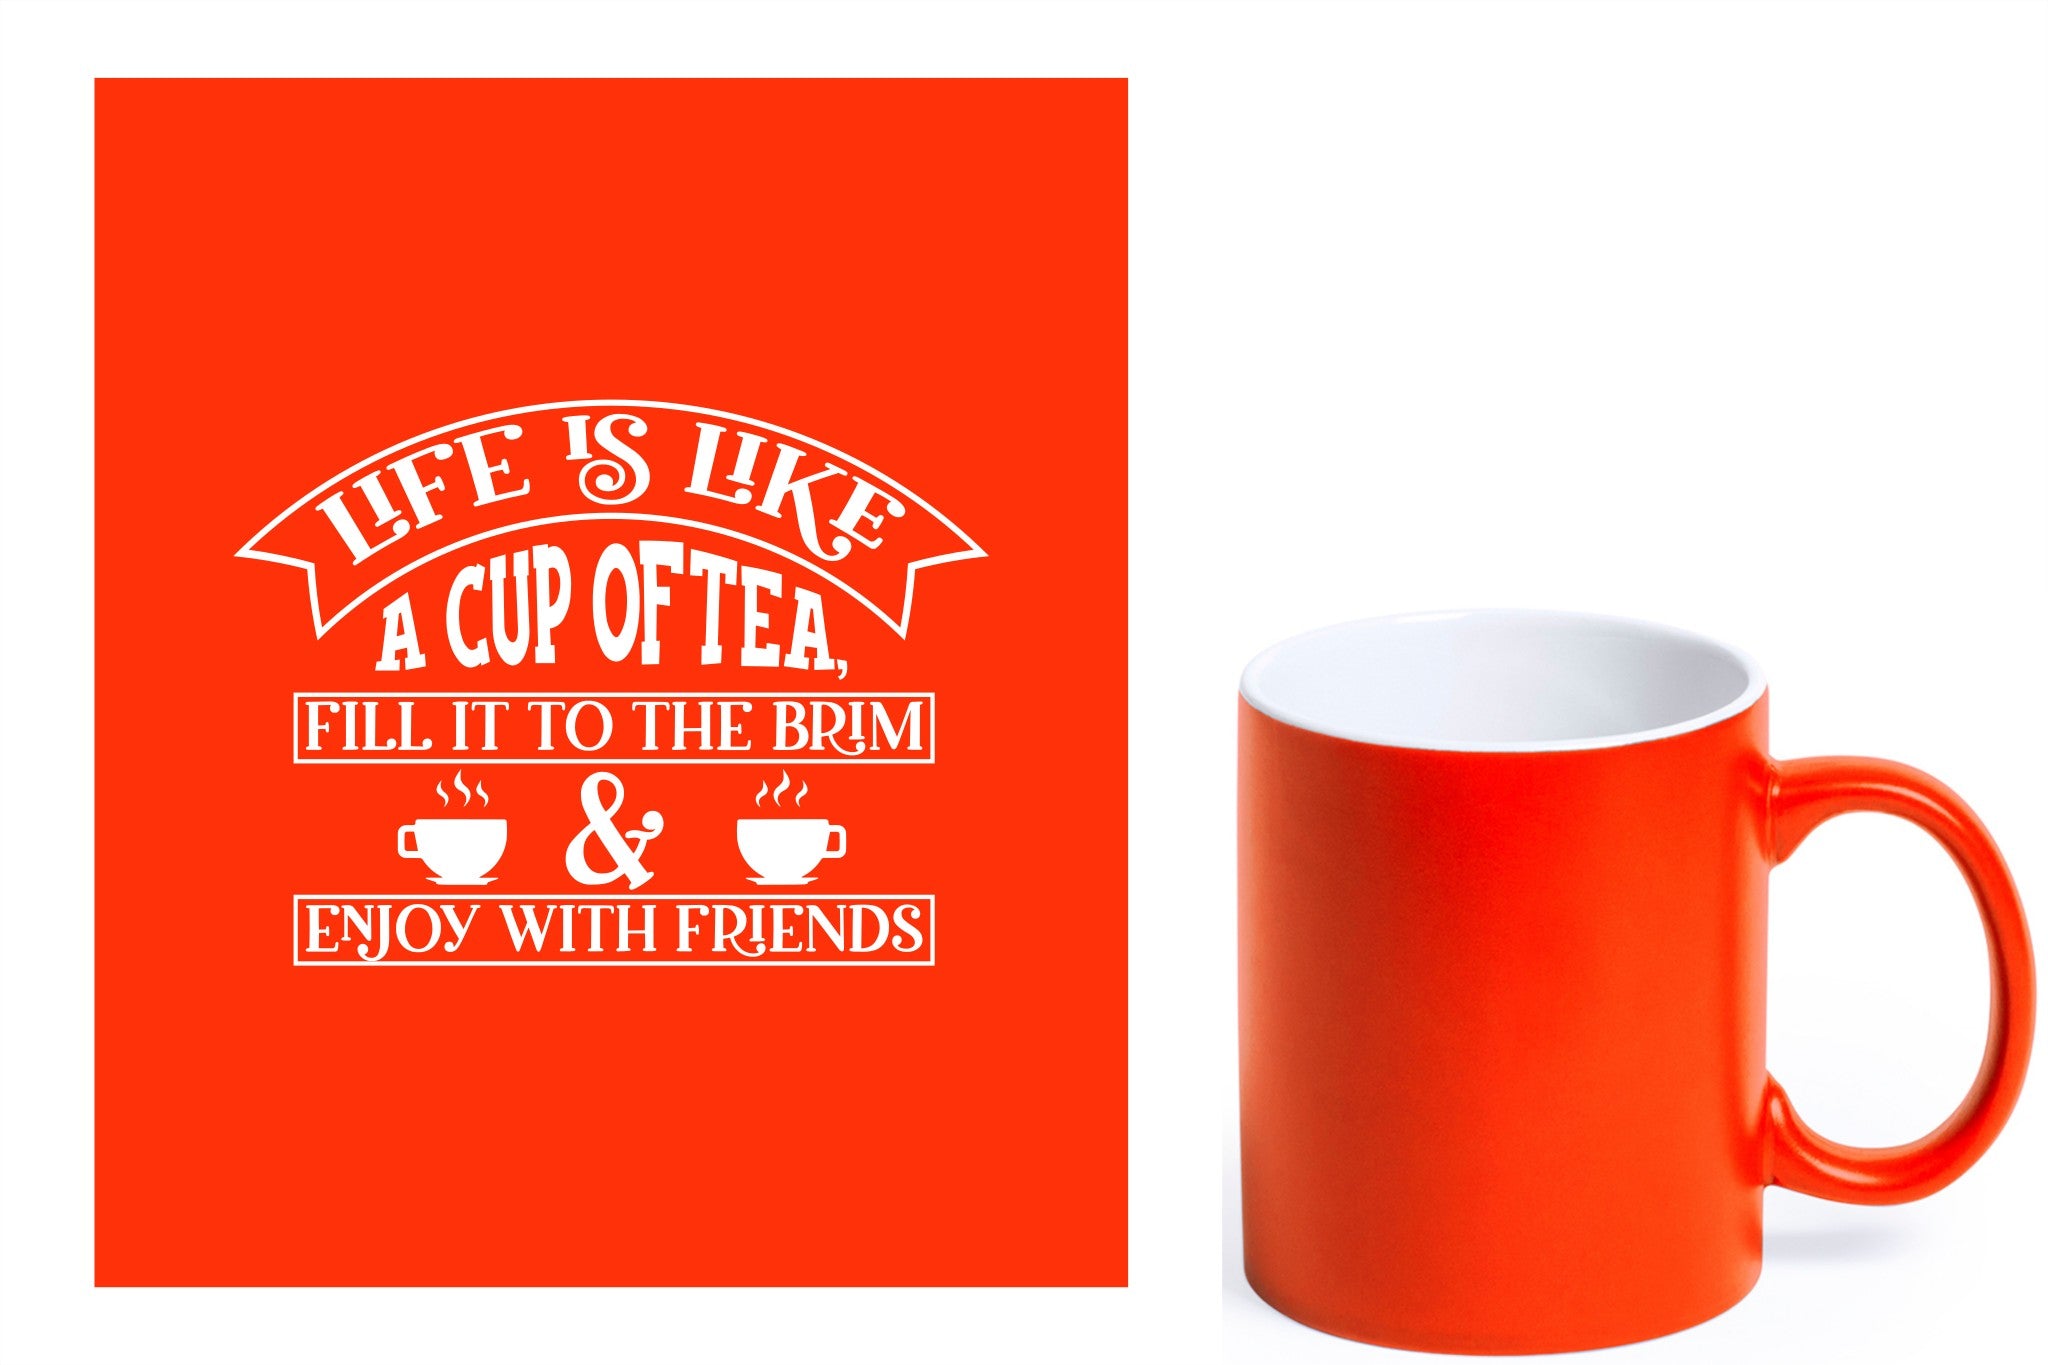 groene keramische mok met witte gravure  'Life is like a cup of tea fill it to the brim & enjoy with friends'.